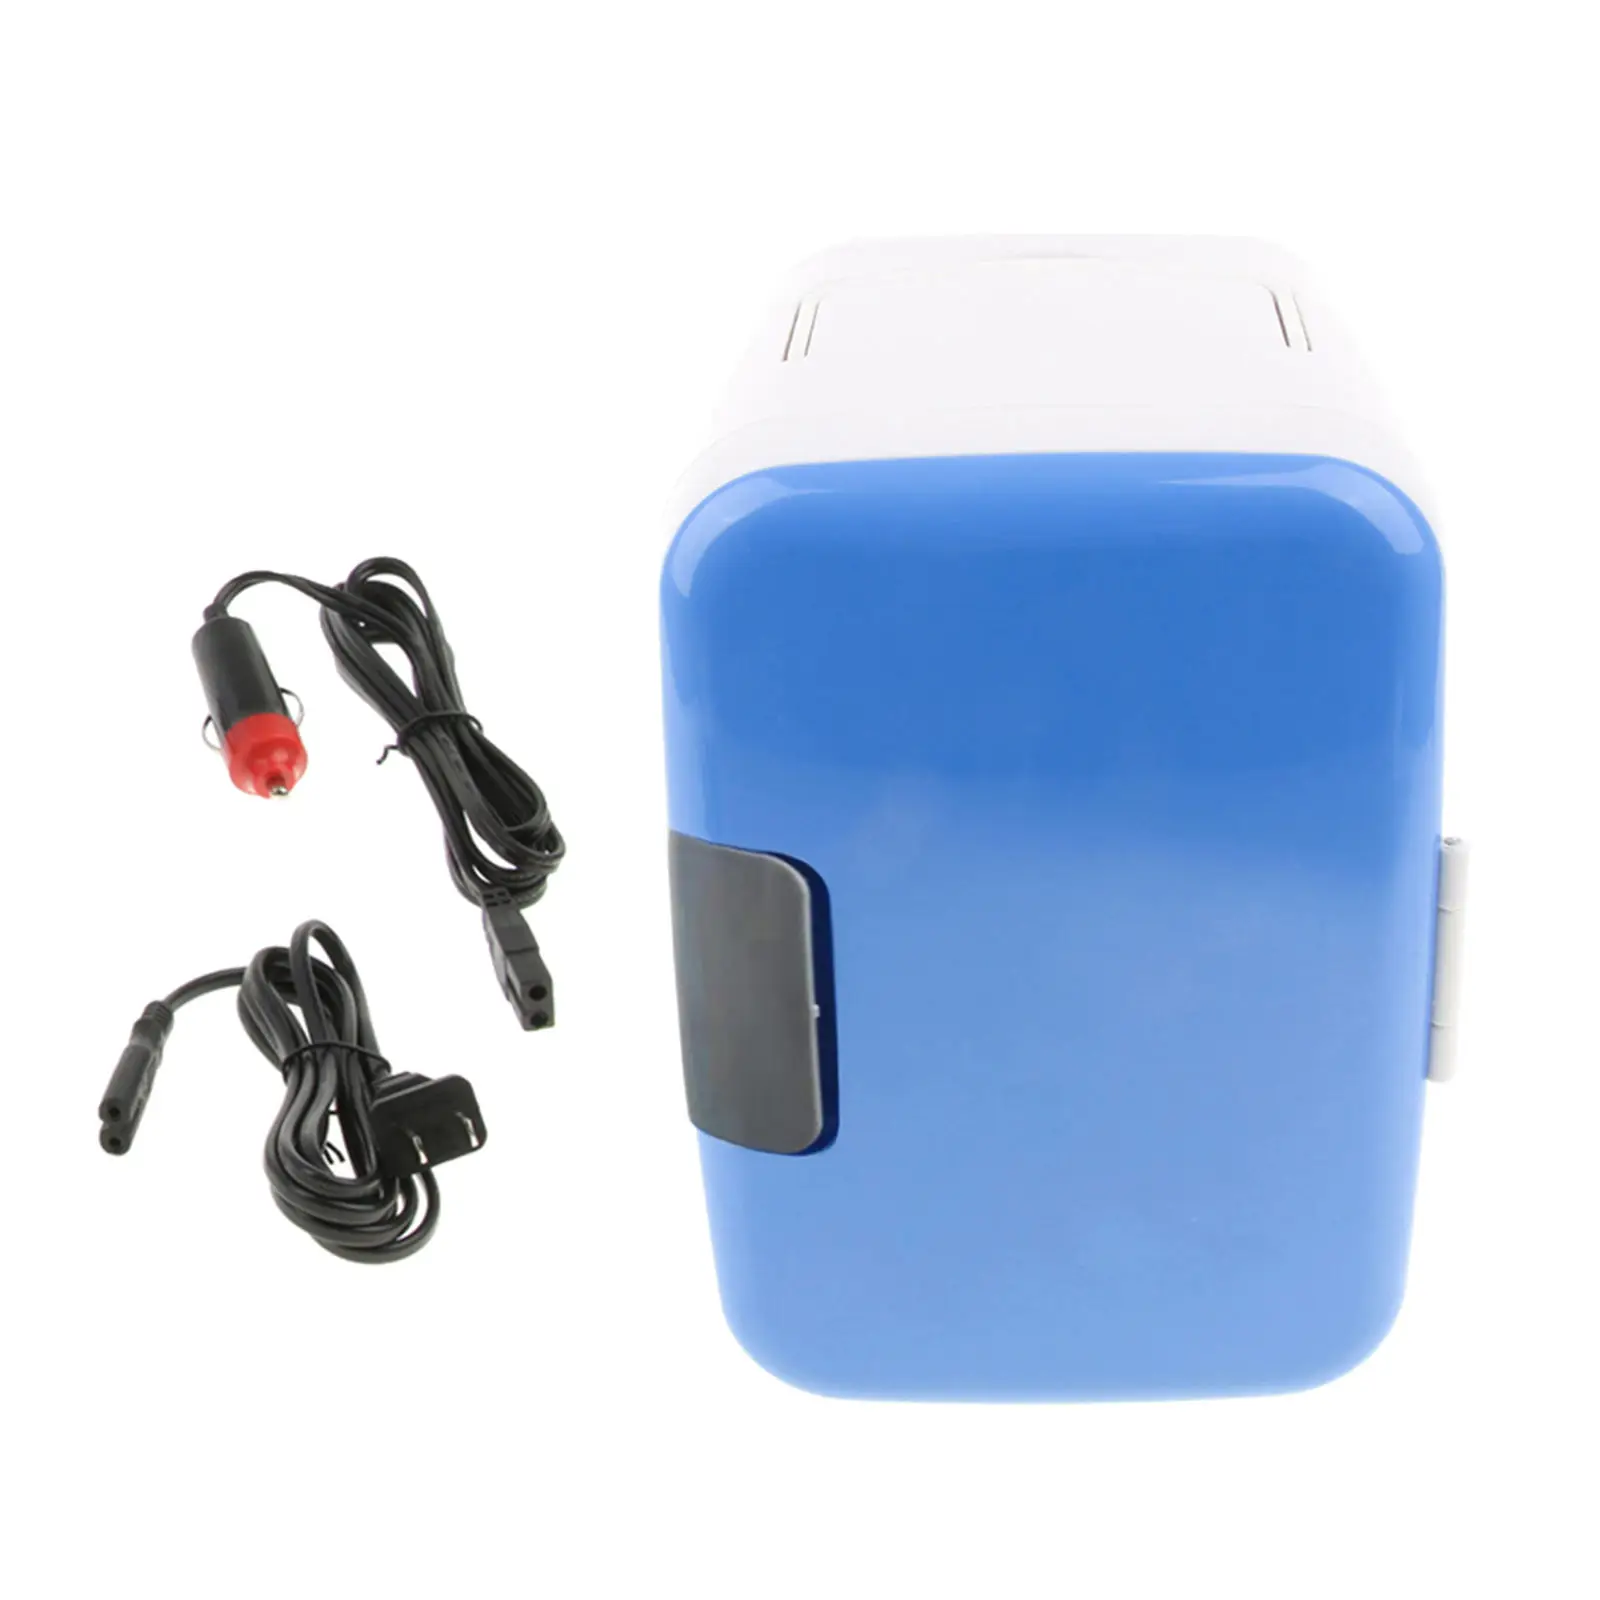 ABS Plastic 4L Car Part Portable Fridge Cooler Warmer Electric Refrigerator 5℃ to 60 ℃